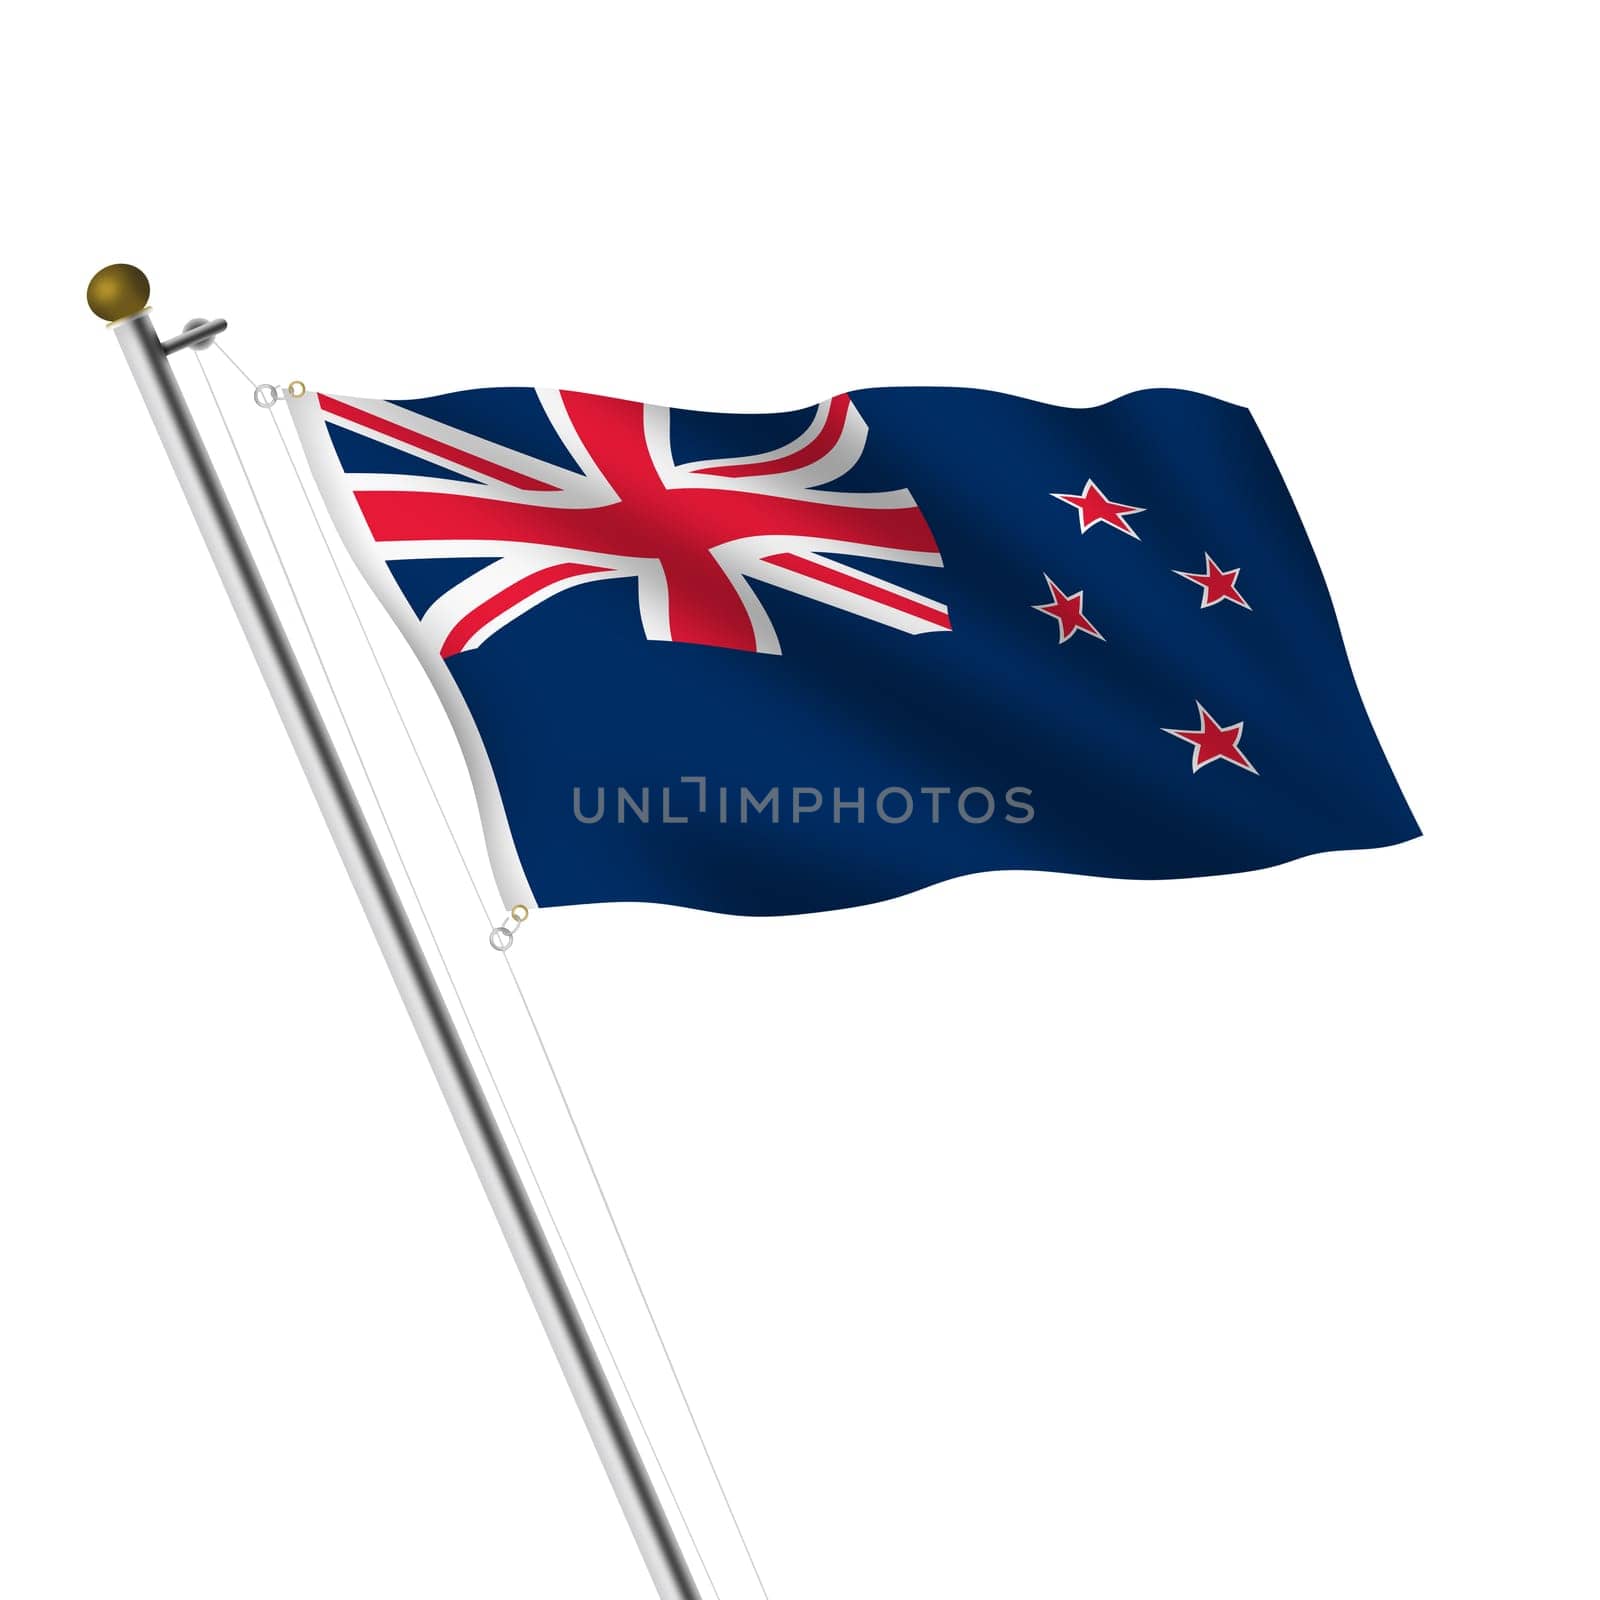 A New Zealand Flagpole 3d illustration on white with clipping path Ensign Flag background union flag southern cross